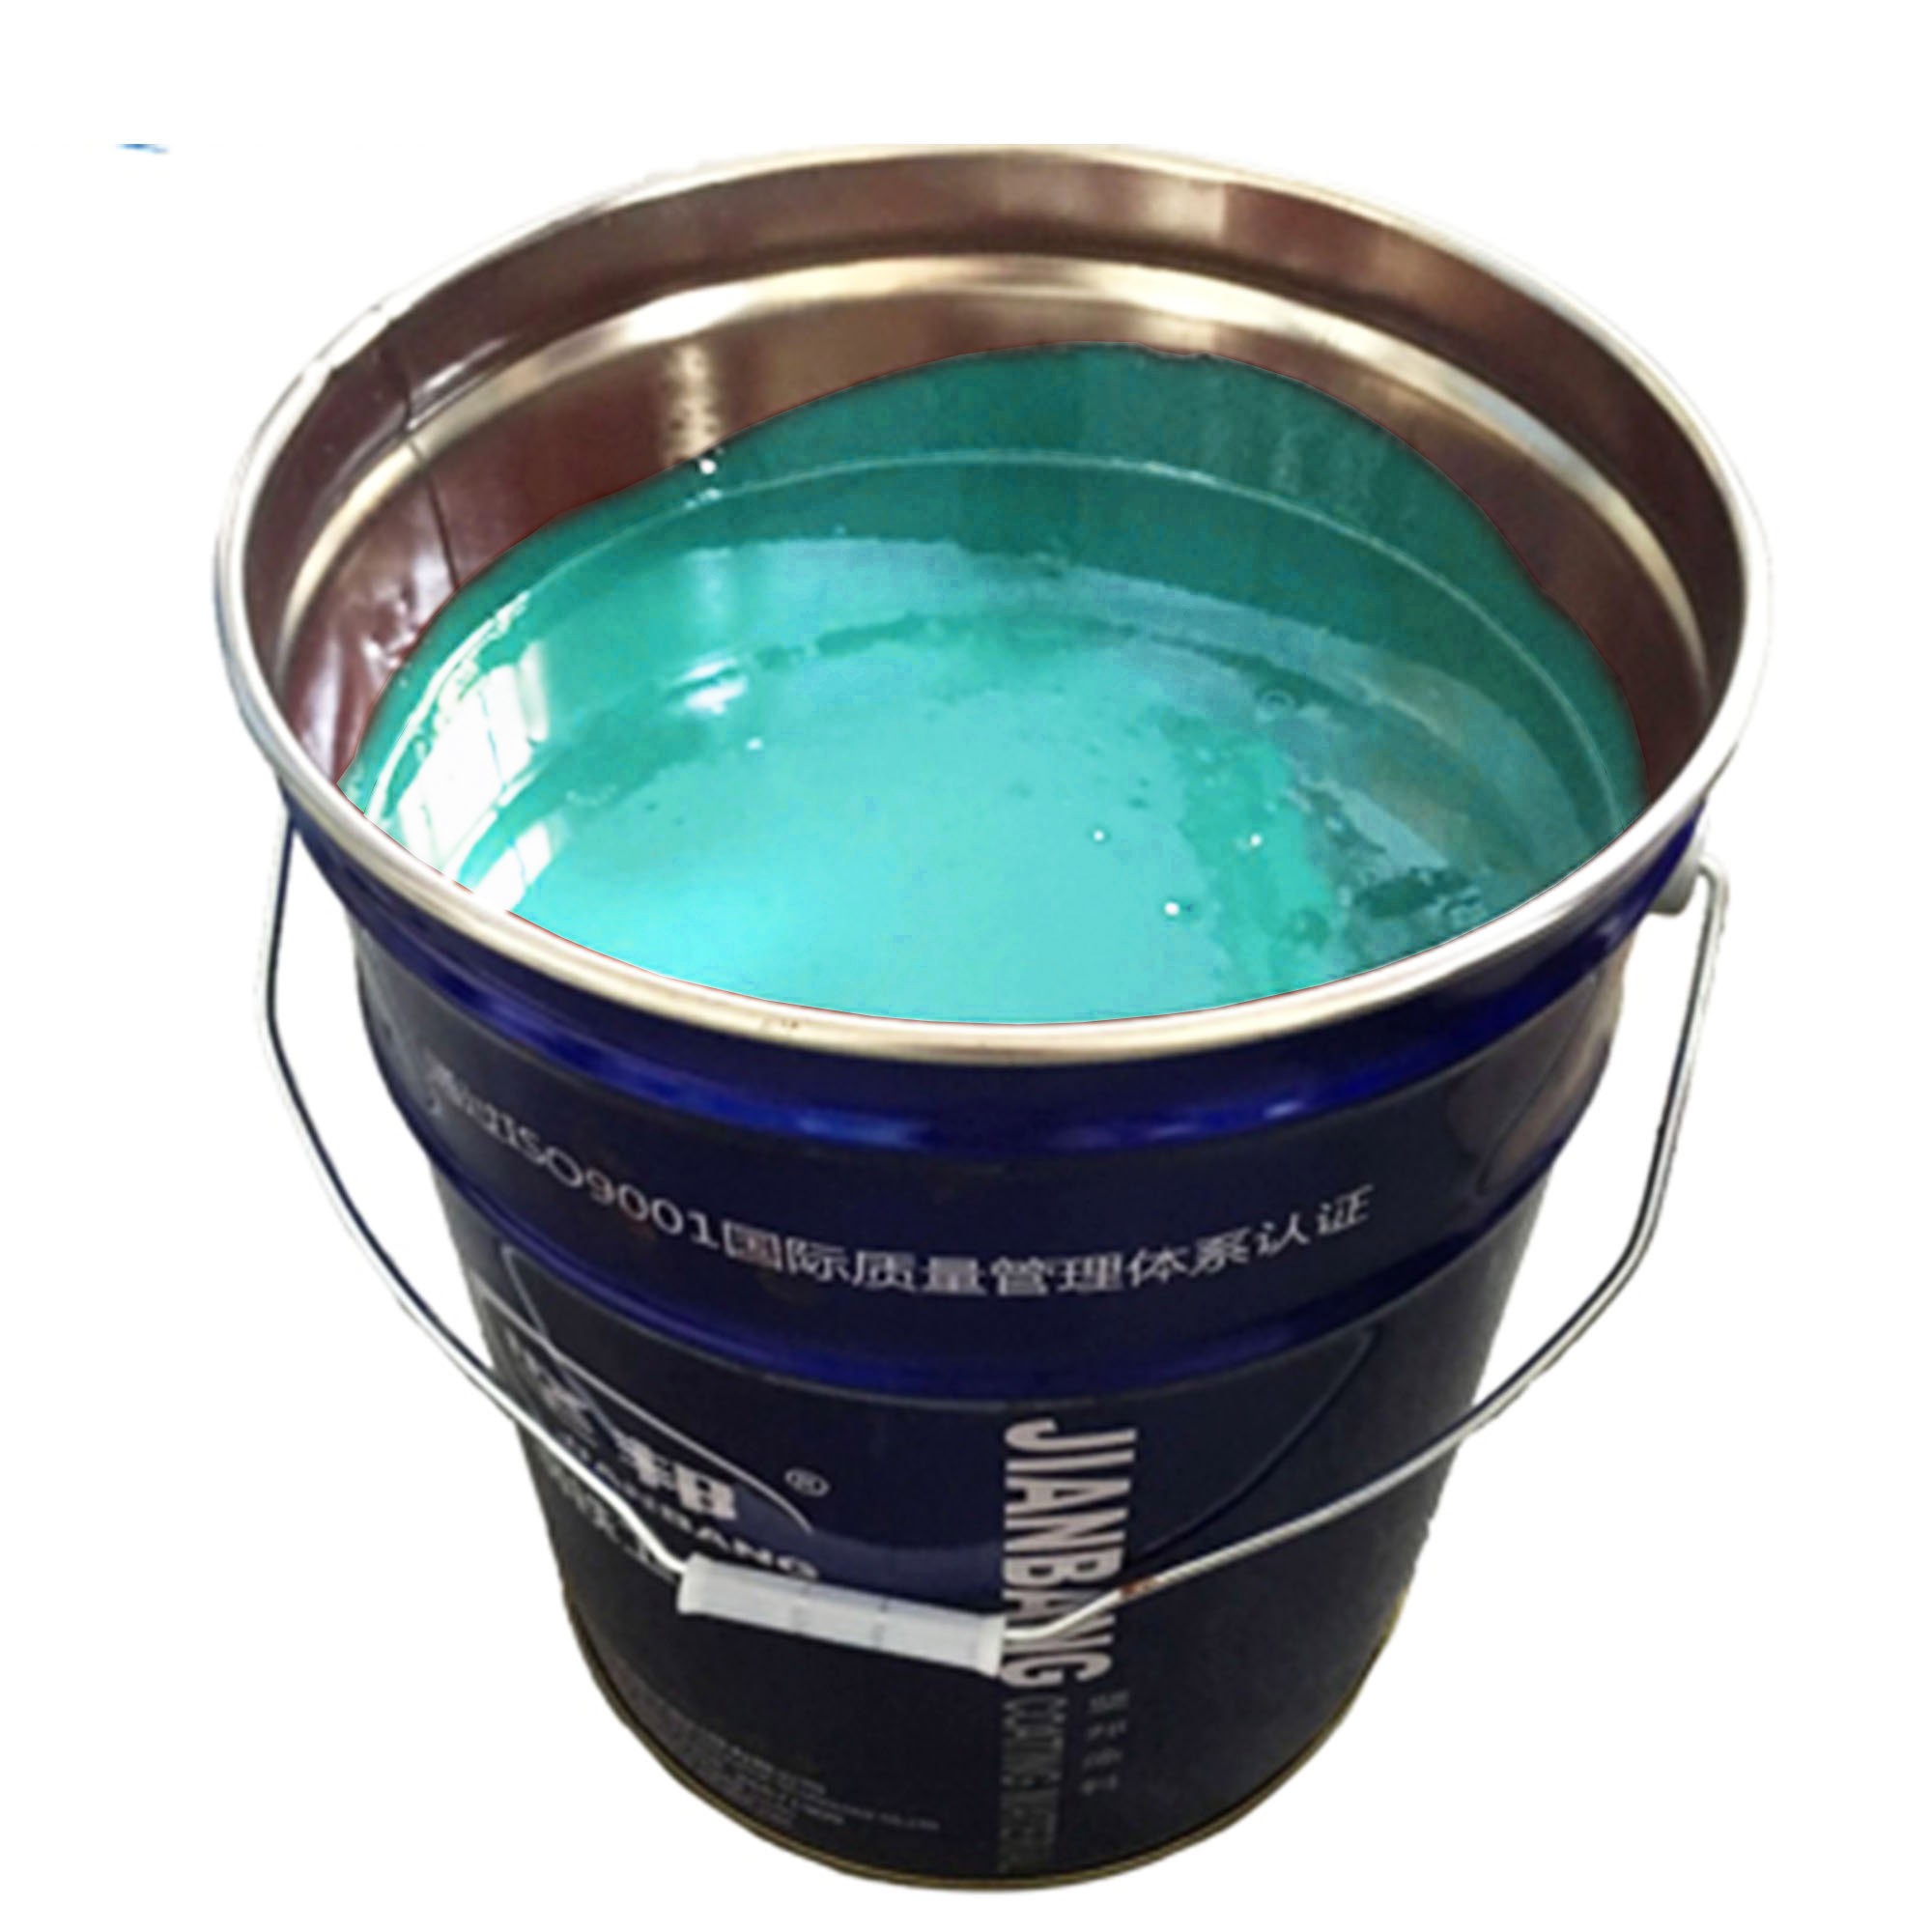 Food process factory Use Solvent free Epoxy coating